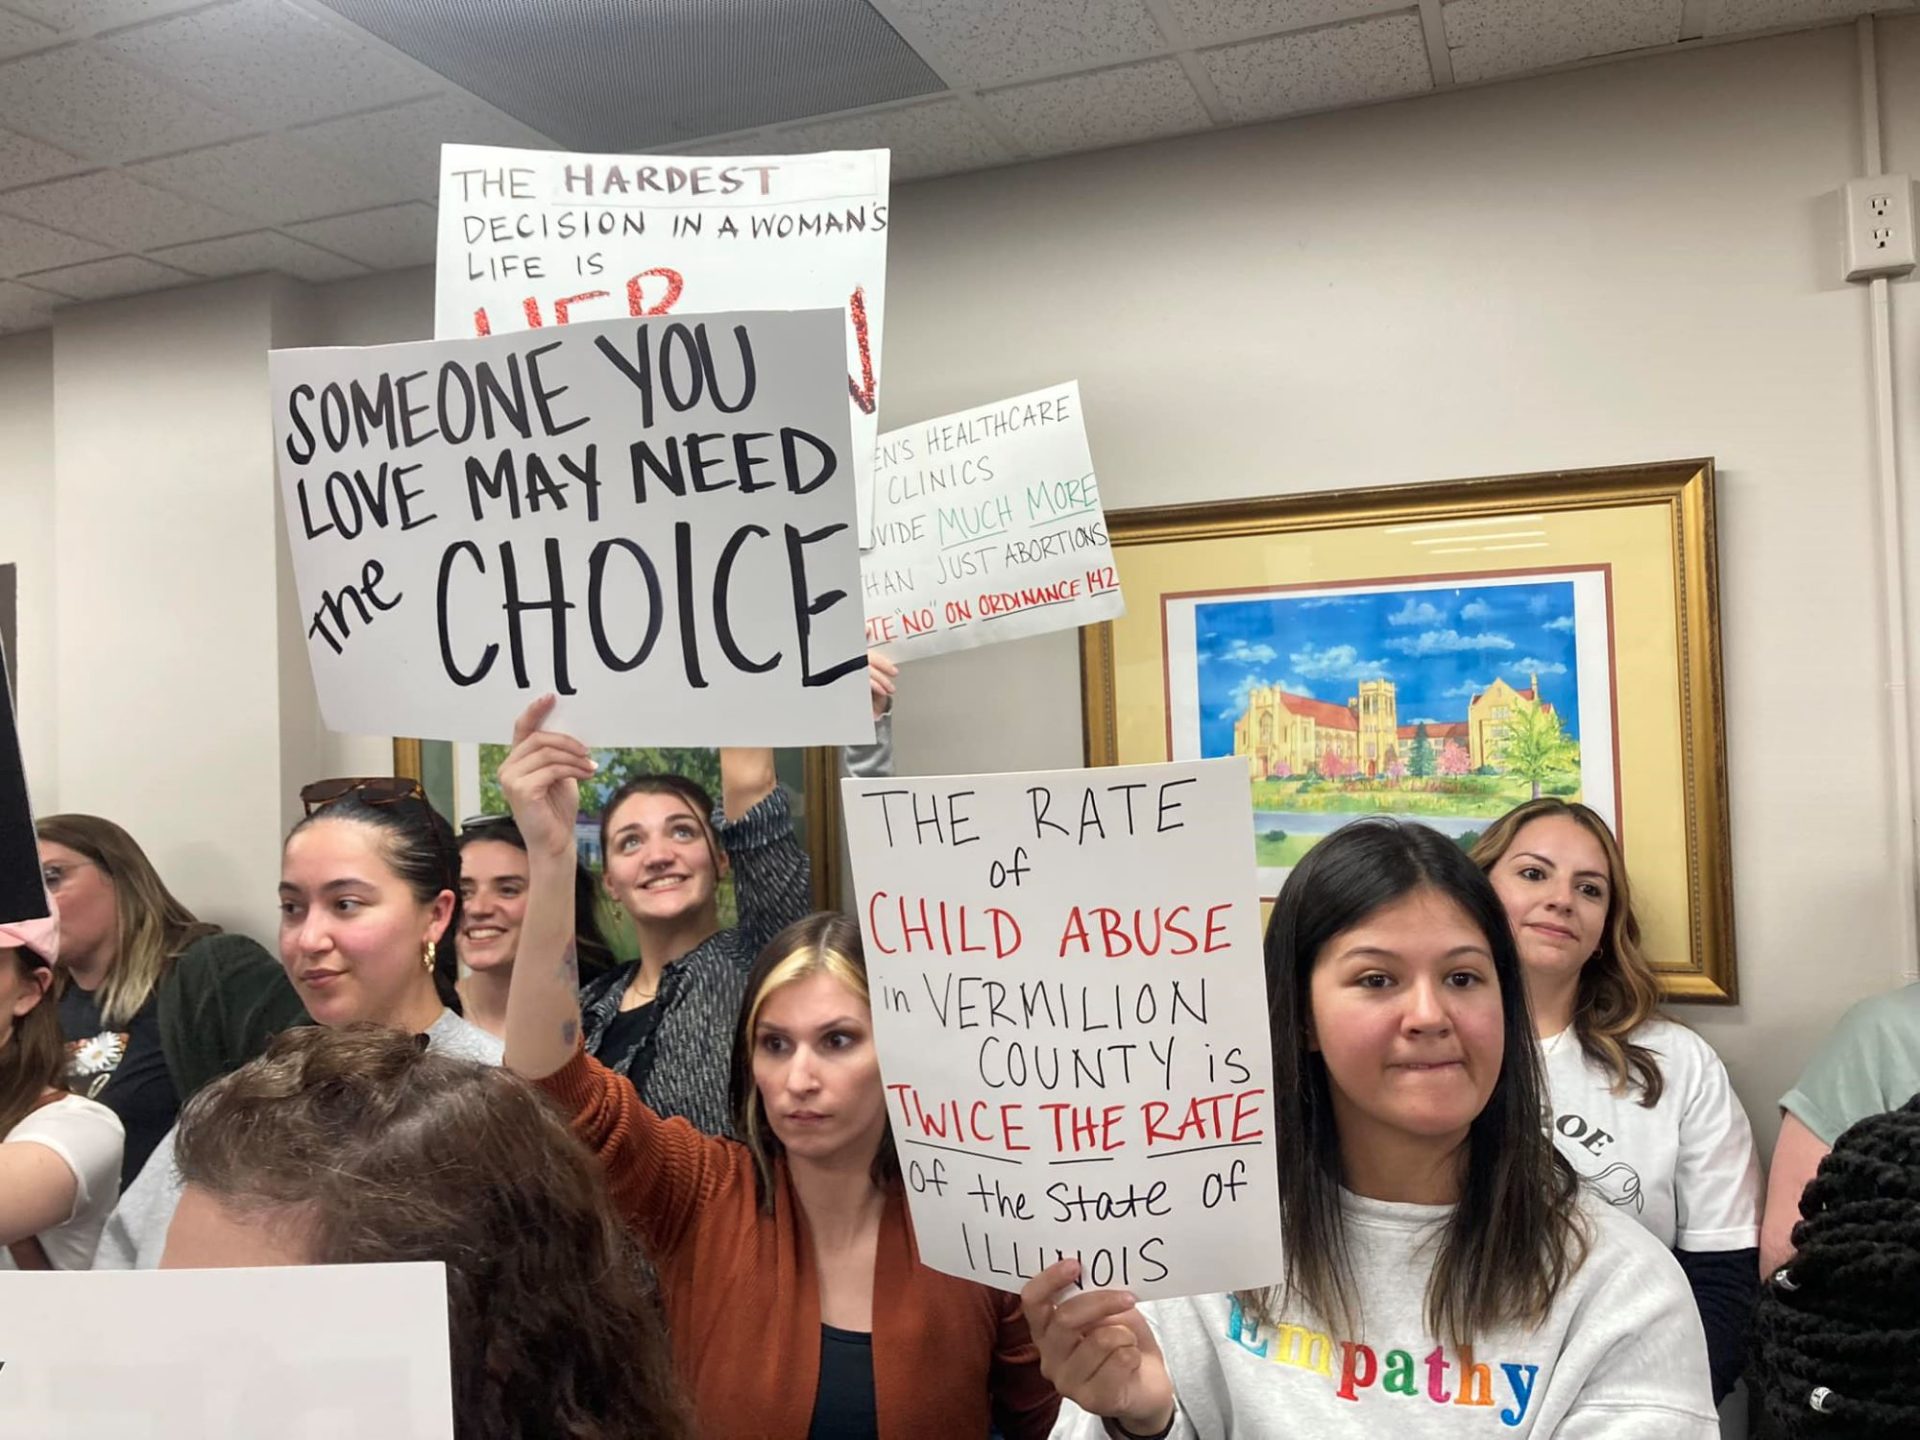 Several women are gathered in a room, holding signs indicating pro-choice views.